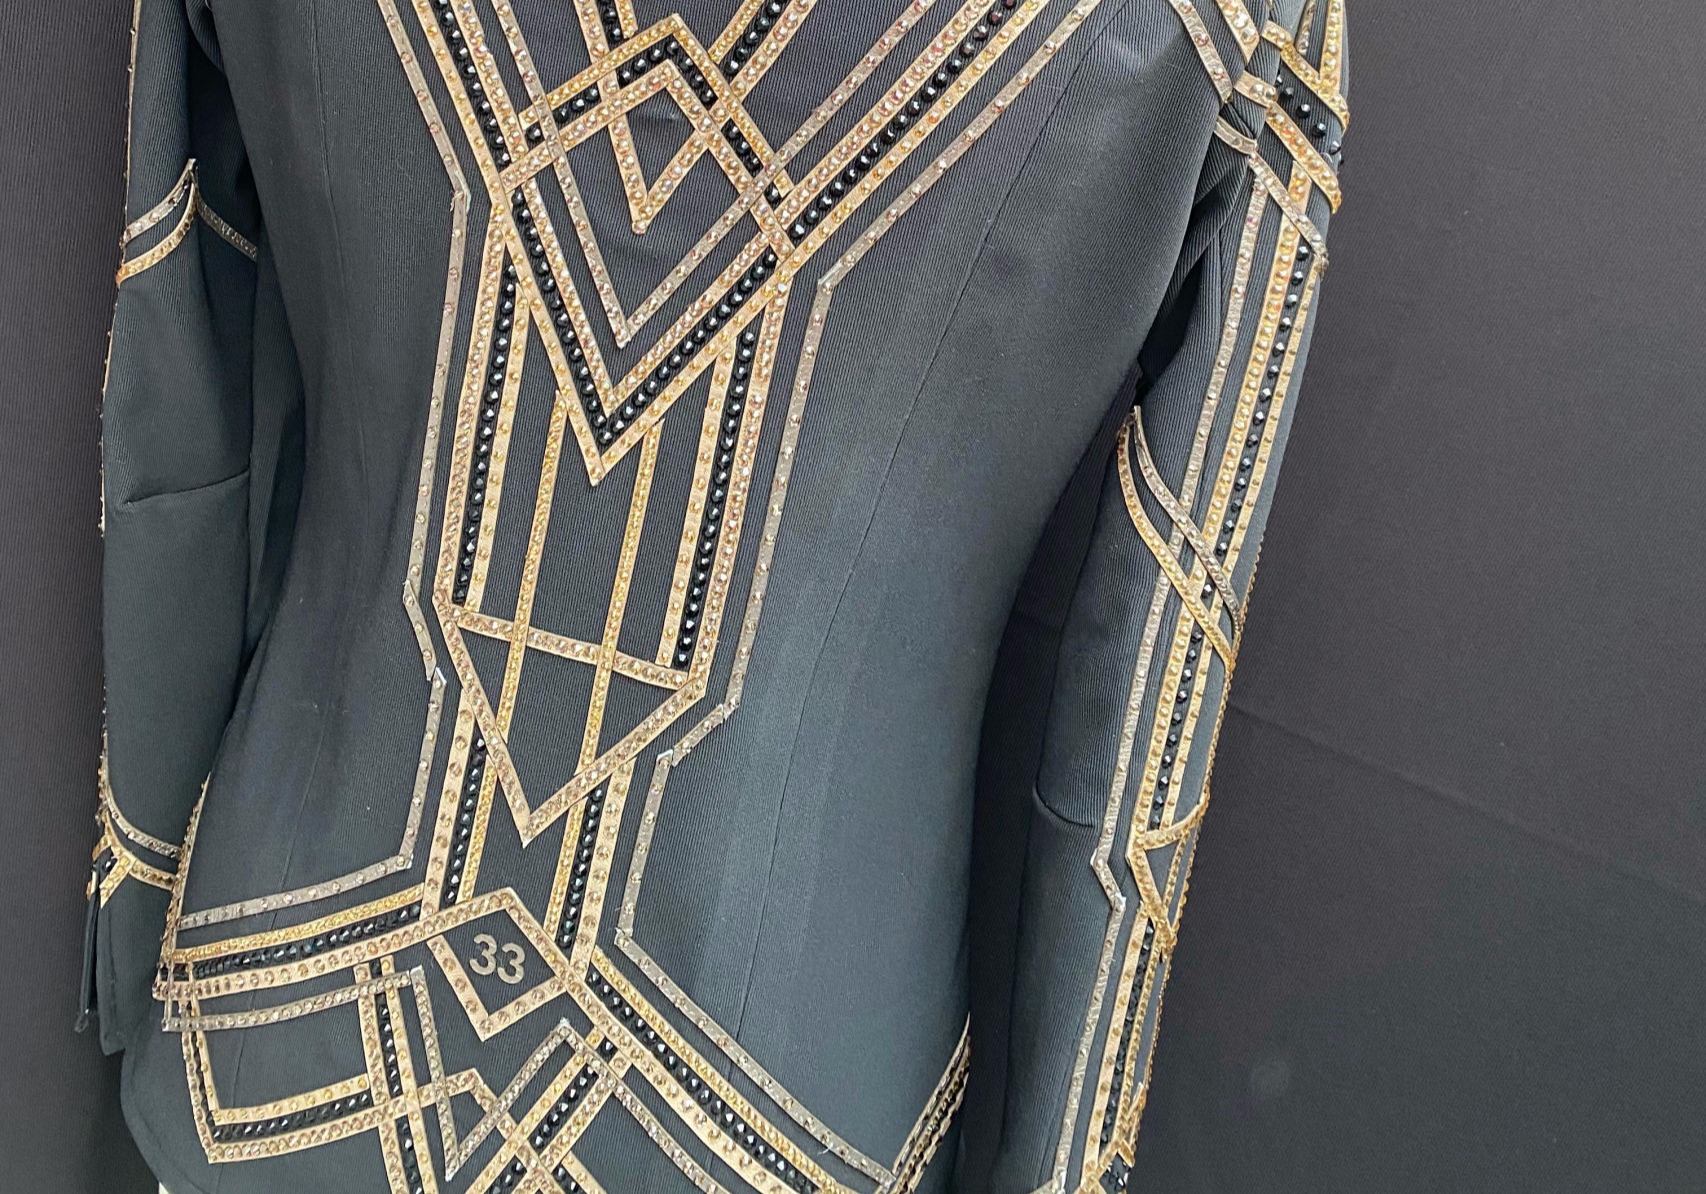 For Sale: Collection 33 Golden Dreams Showmanship Jacket detailed with gold and pewter leathers and crystals 